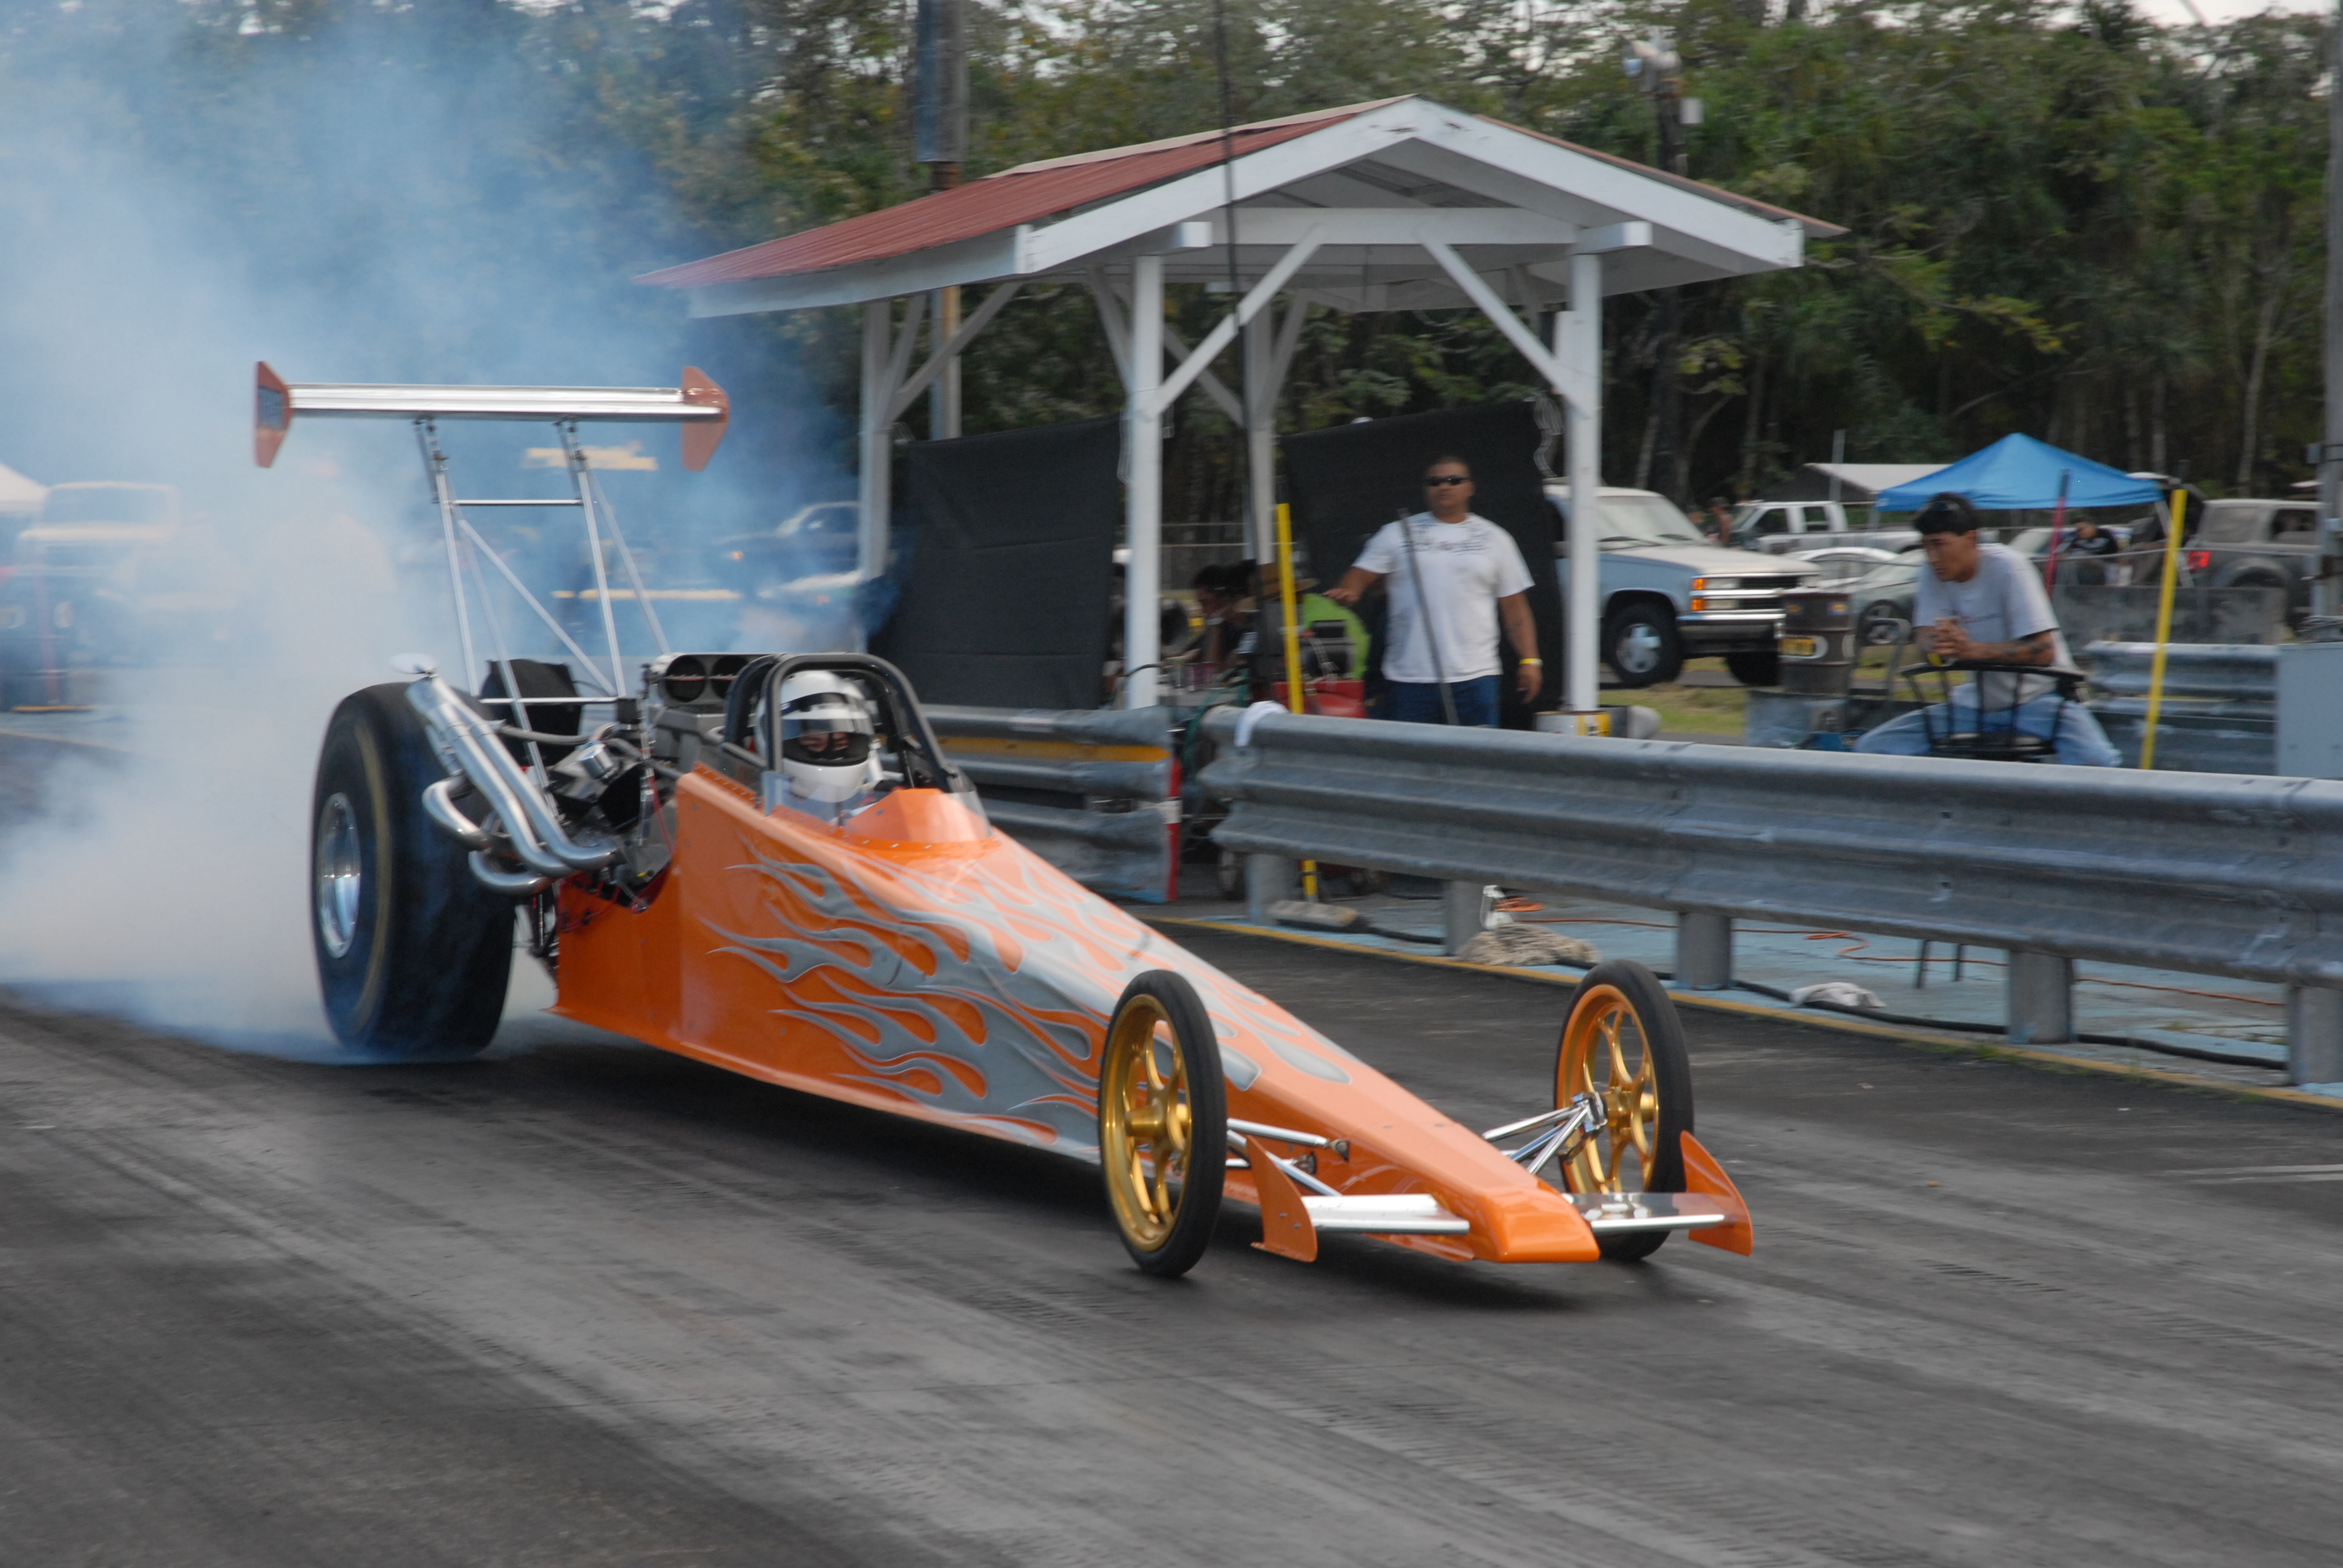 Paul Crivello Top Comp Dragster Hawaii